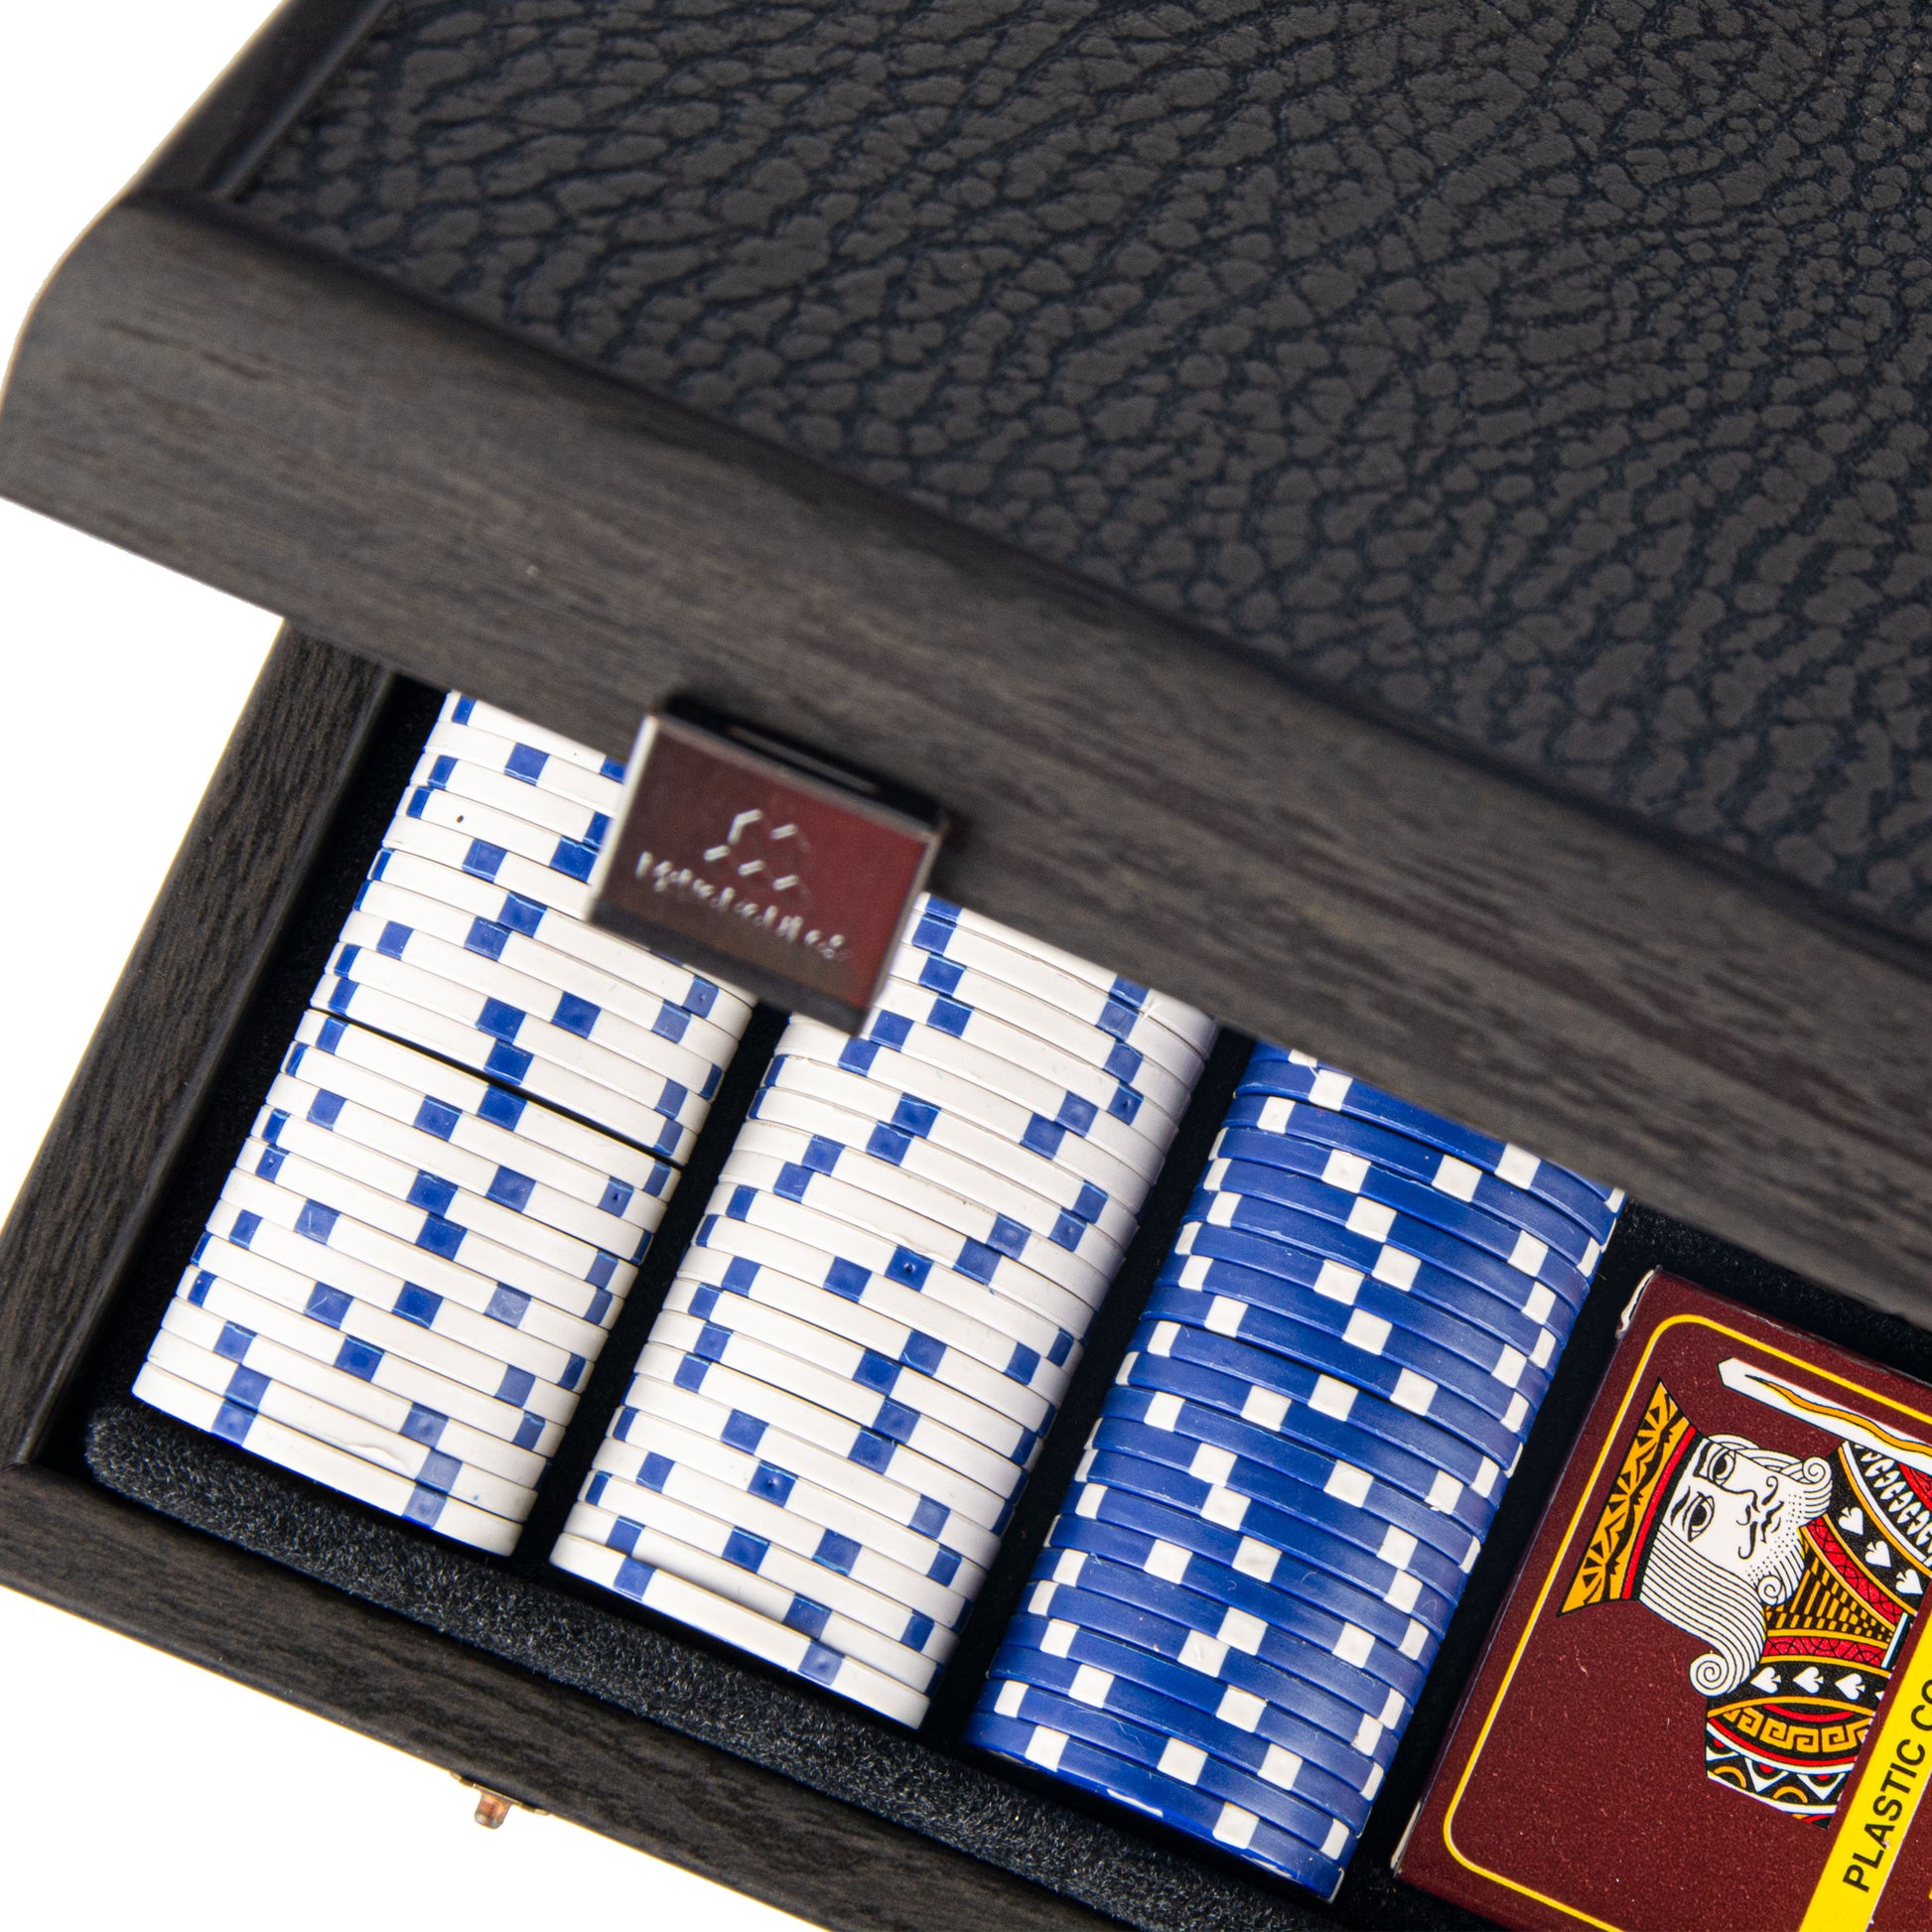 Luxury Poker Set in Black Wooden Case with Black Leatherette Top - Premium Poker Set from MANOPOULOS Chess & Backgammon - Just €190! Shop now at MANOPOULOS Chess & Backgammon